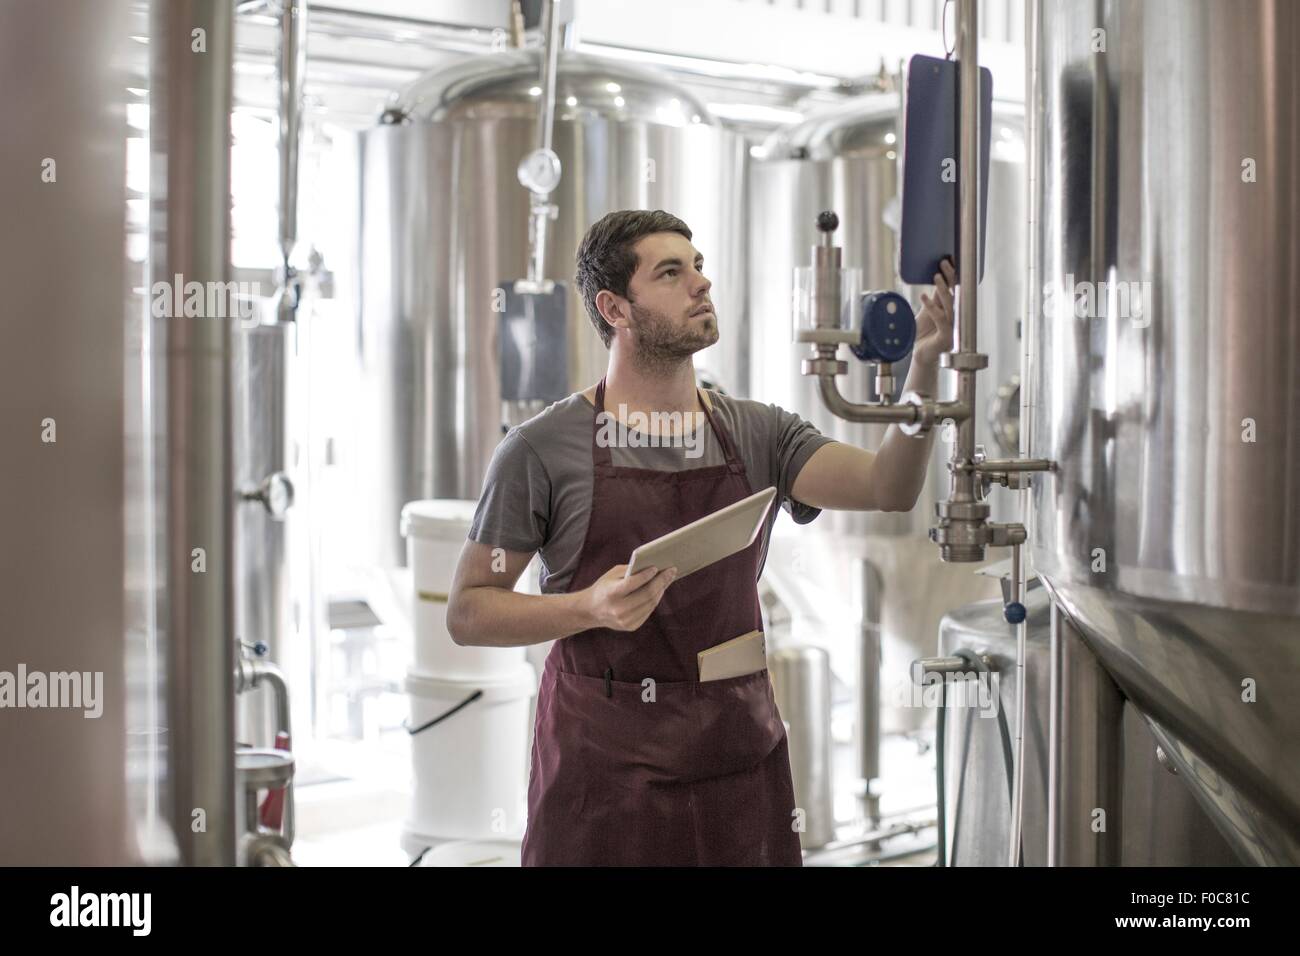 Brewers in brewery standing next to stainless steel tanks Stock Photo